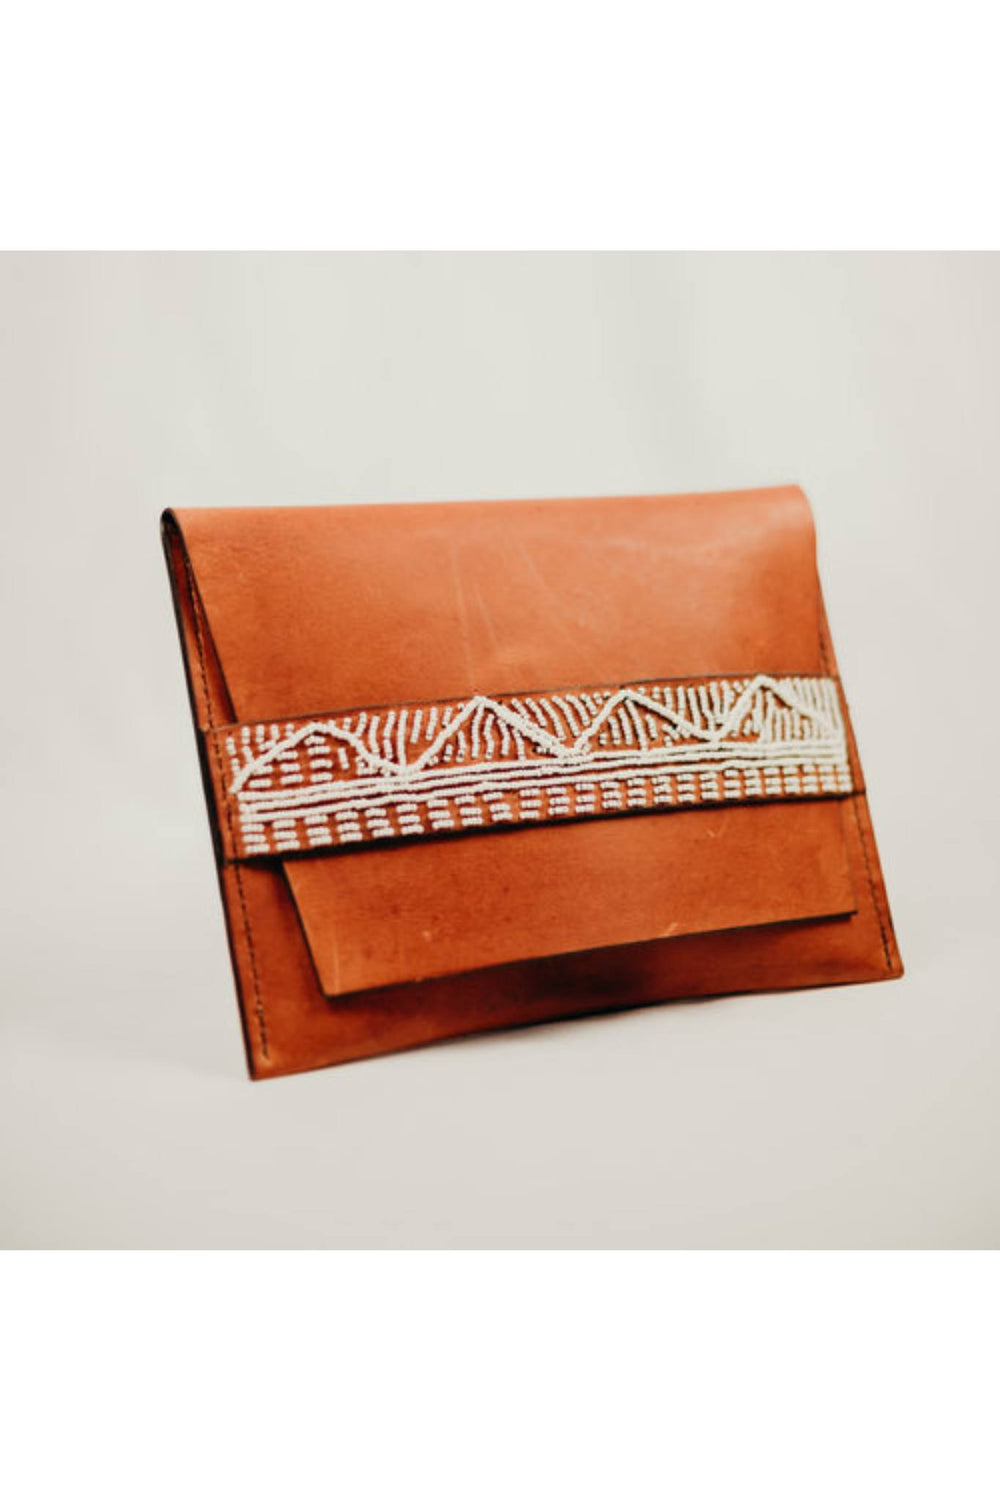 Taino Clutch by 2nd Story Goods